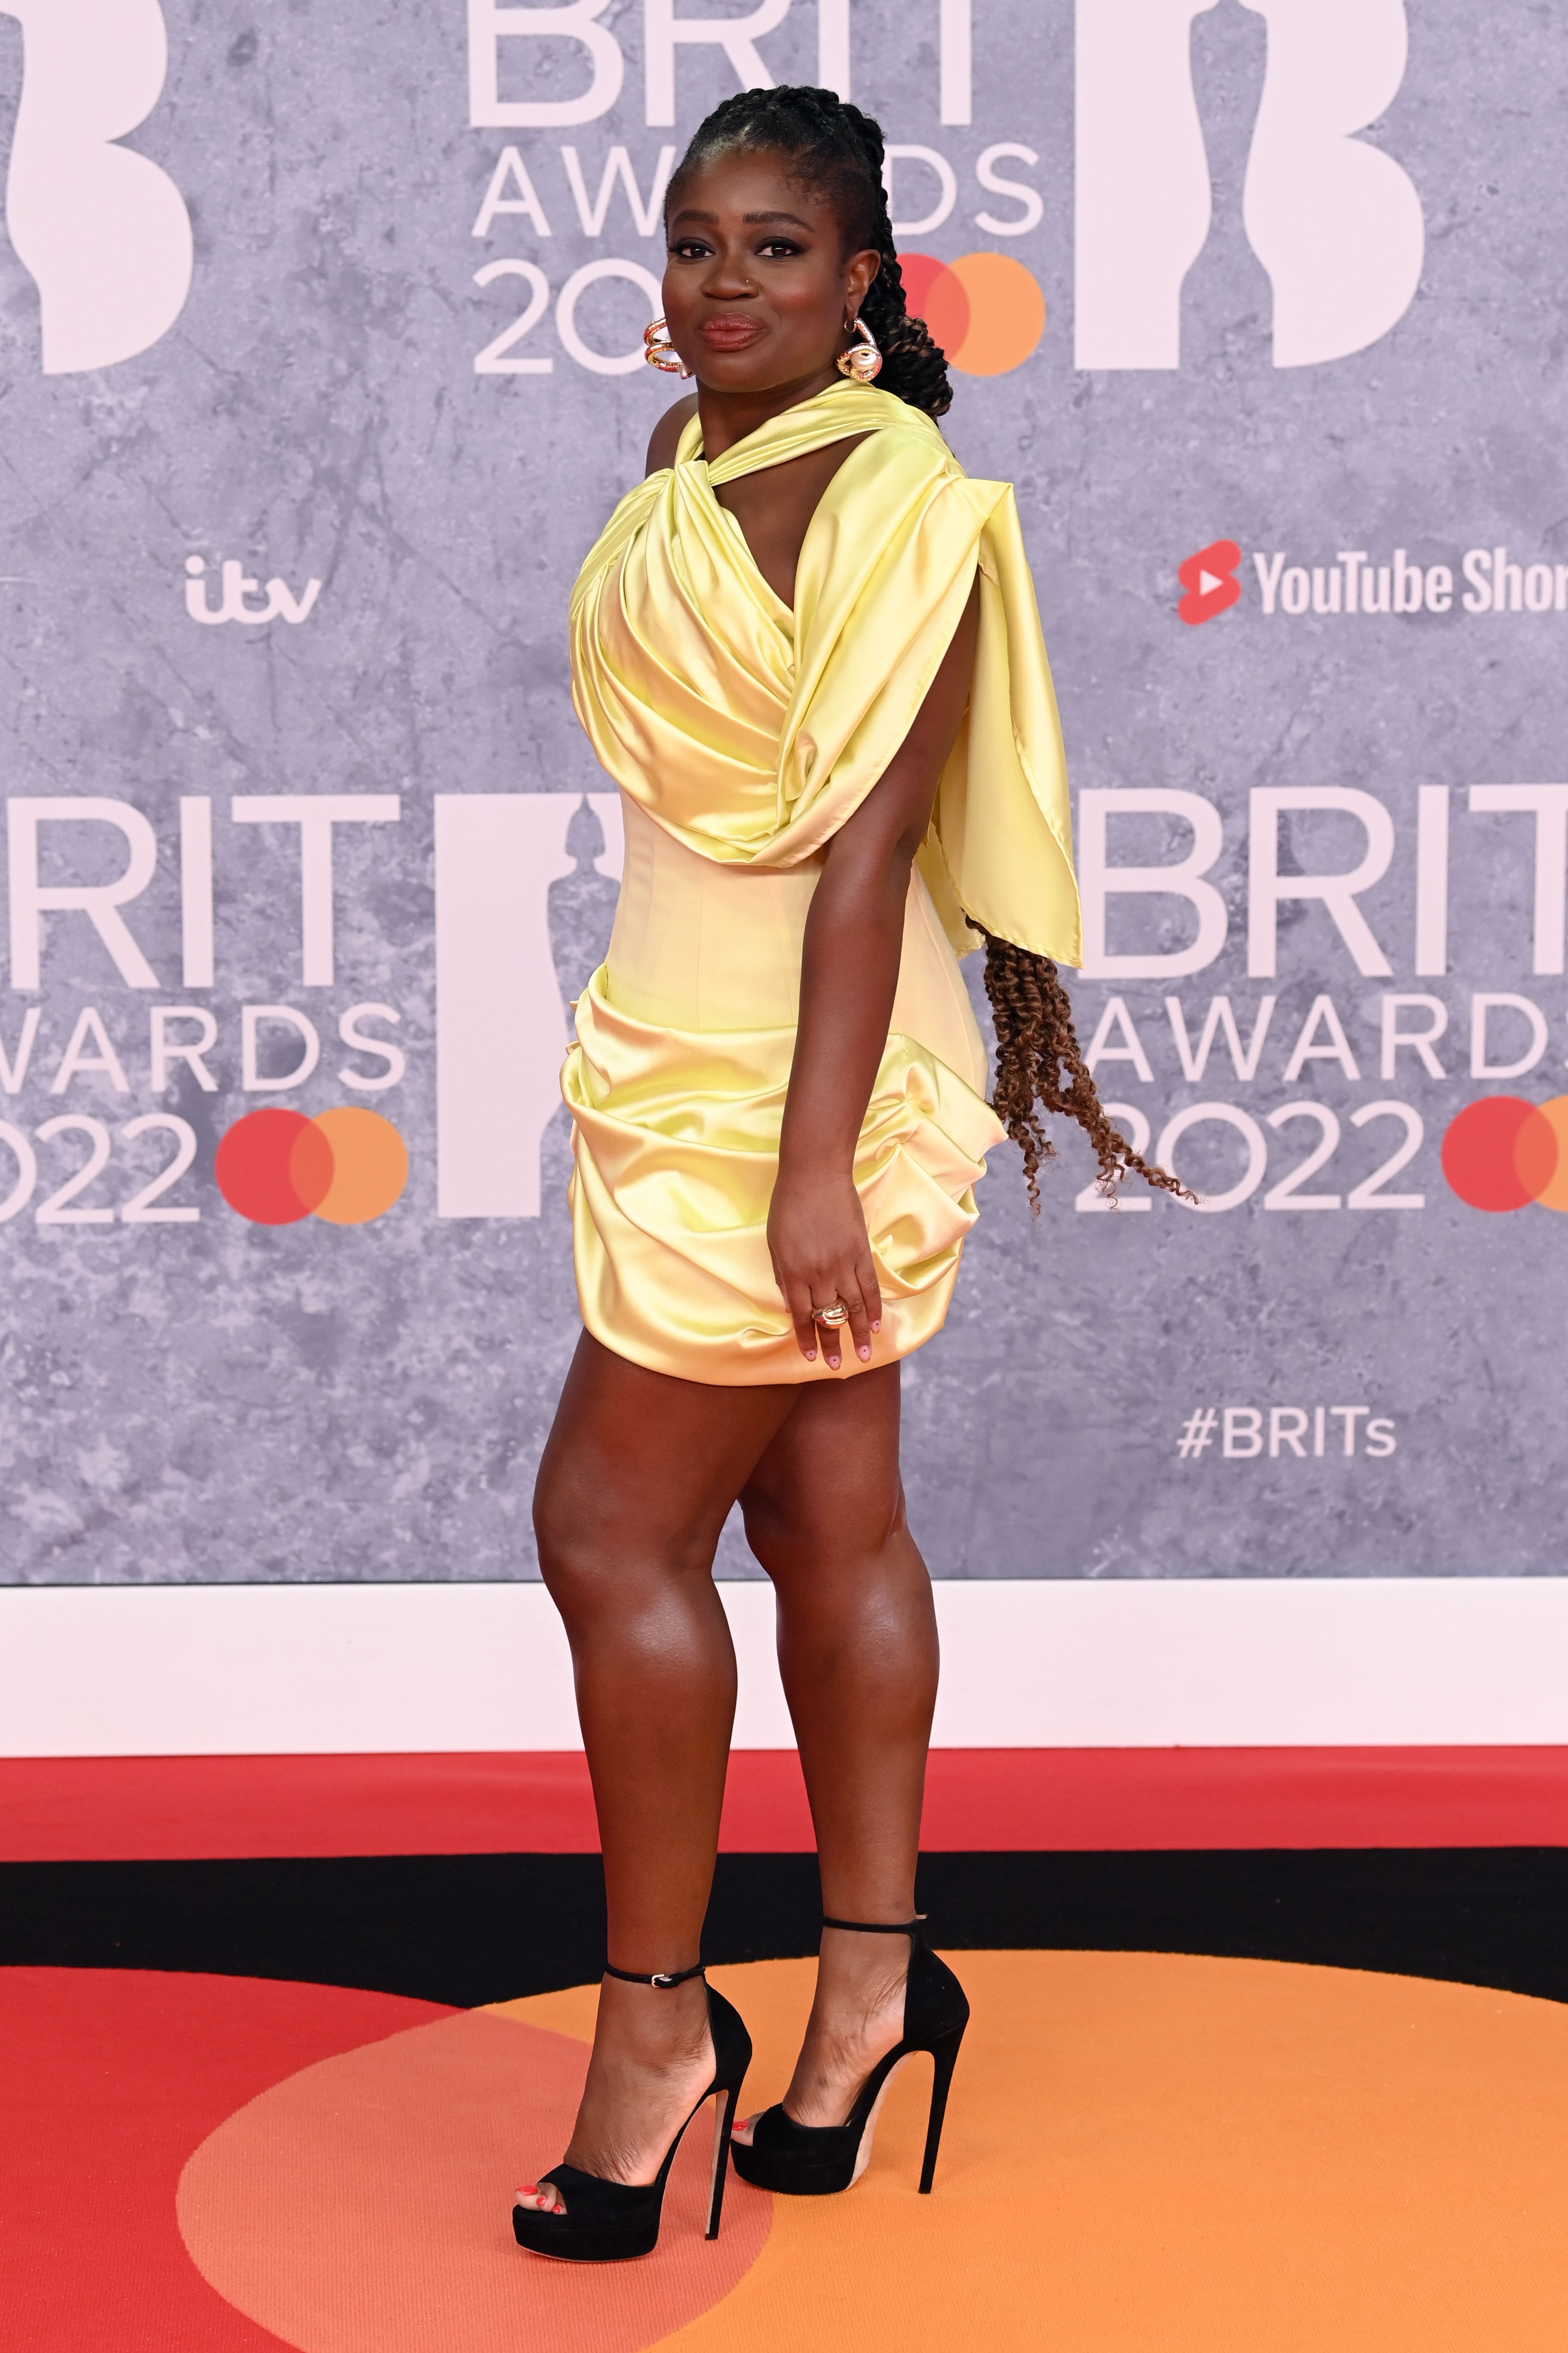 The radio host wore a satin yellow mini dress that featured a ruched skirt and a halter-neck on the red carpet, pairing the look with black platform stilettos from Jimmy Choo.